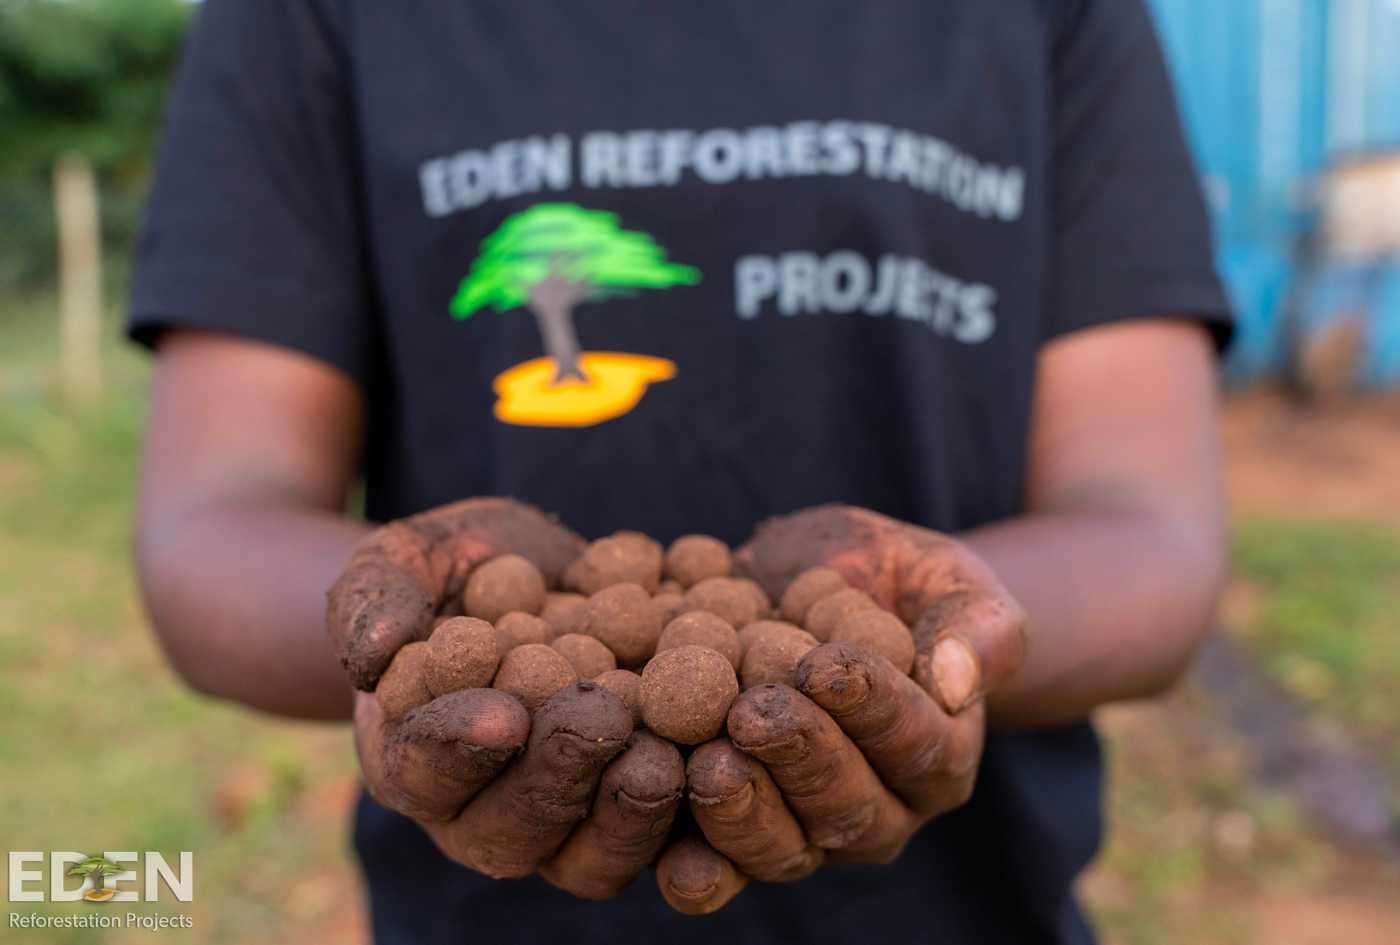 Local worker holding tree seeds in their hand